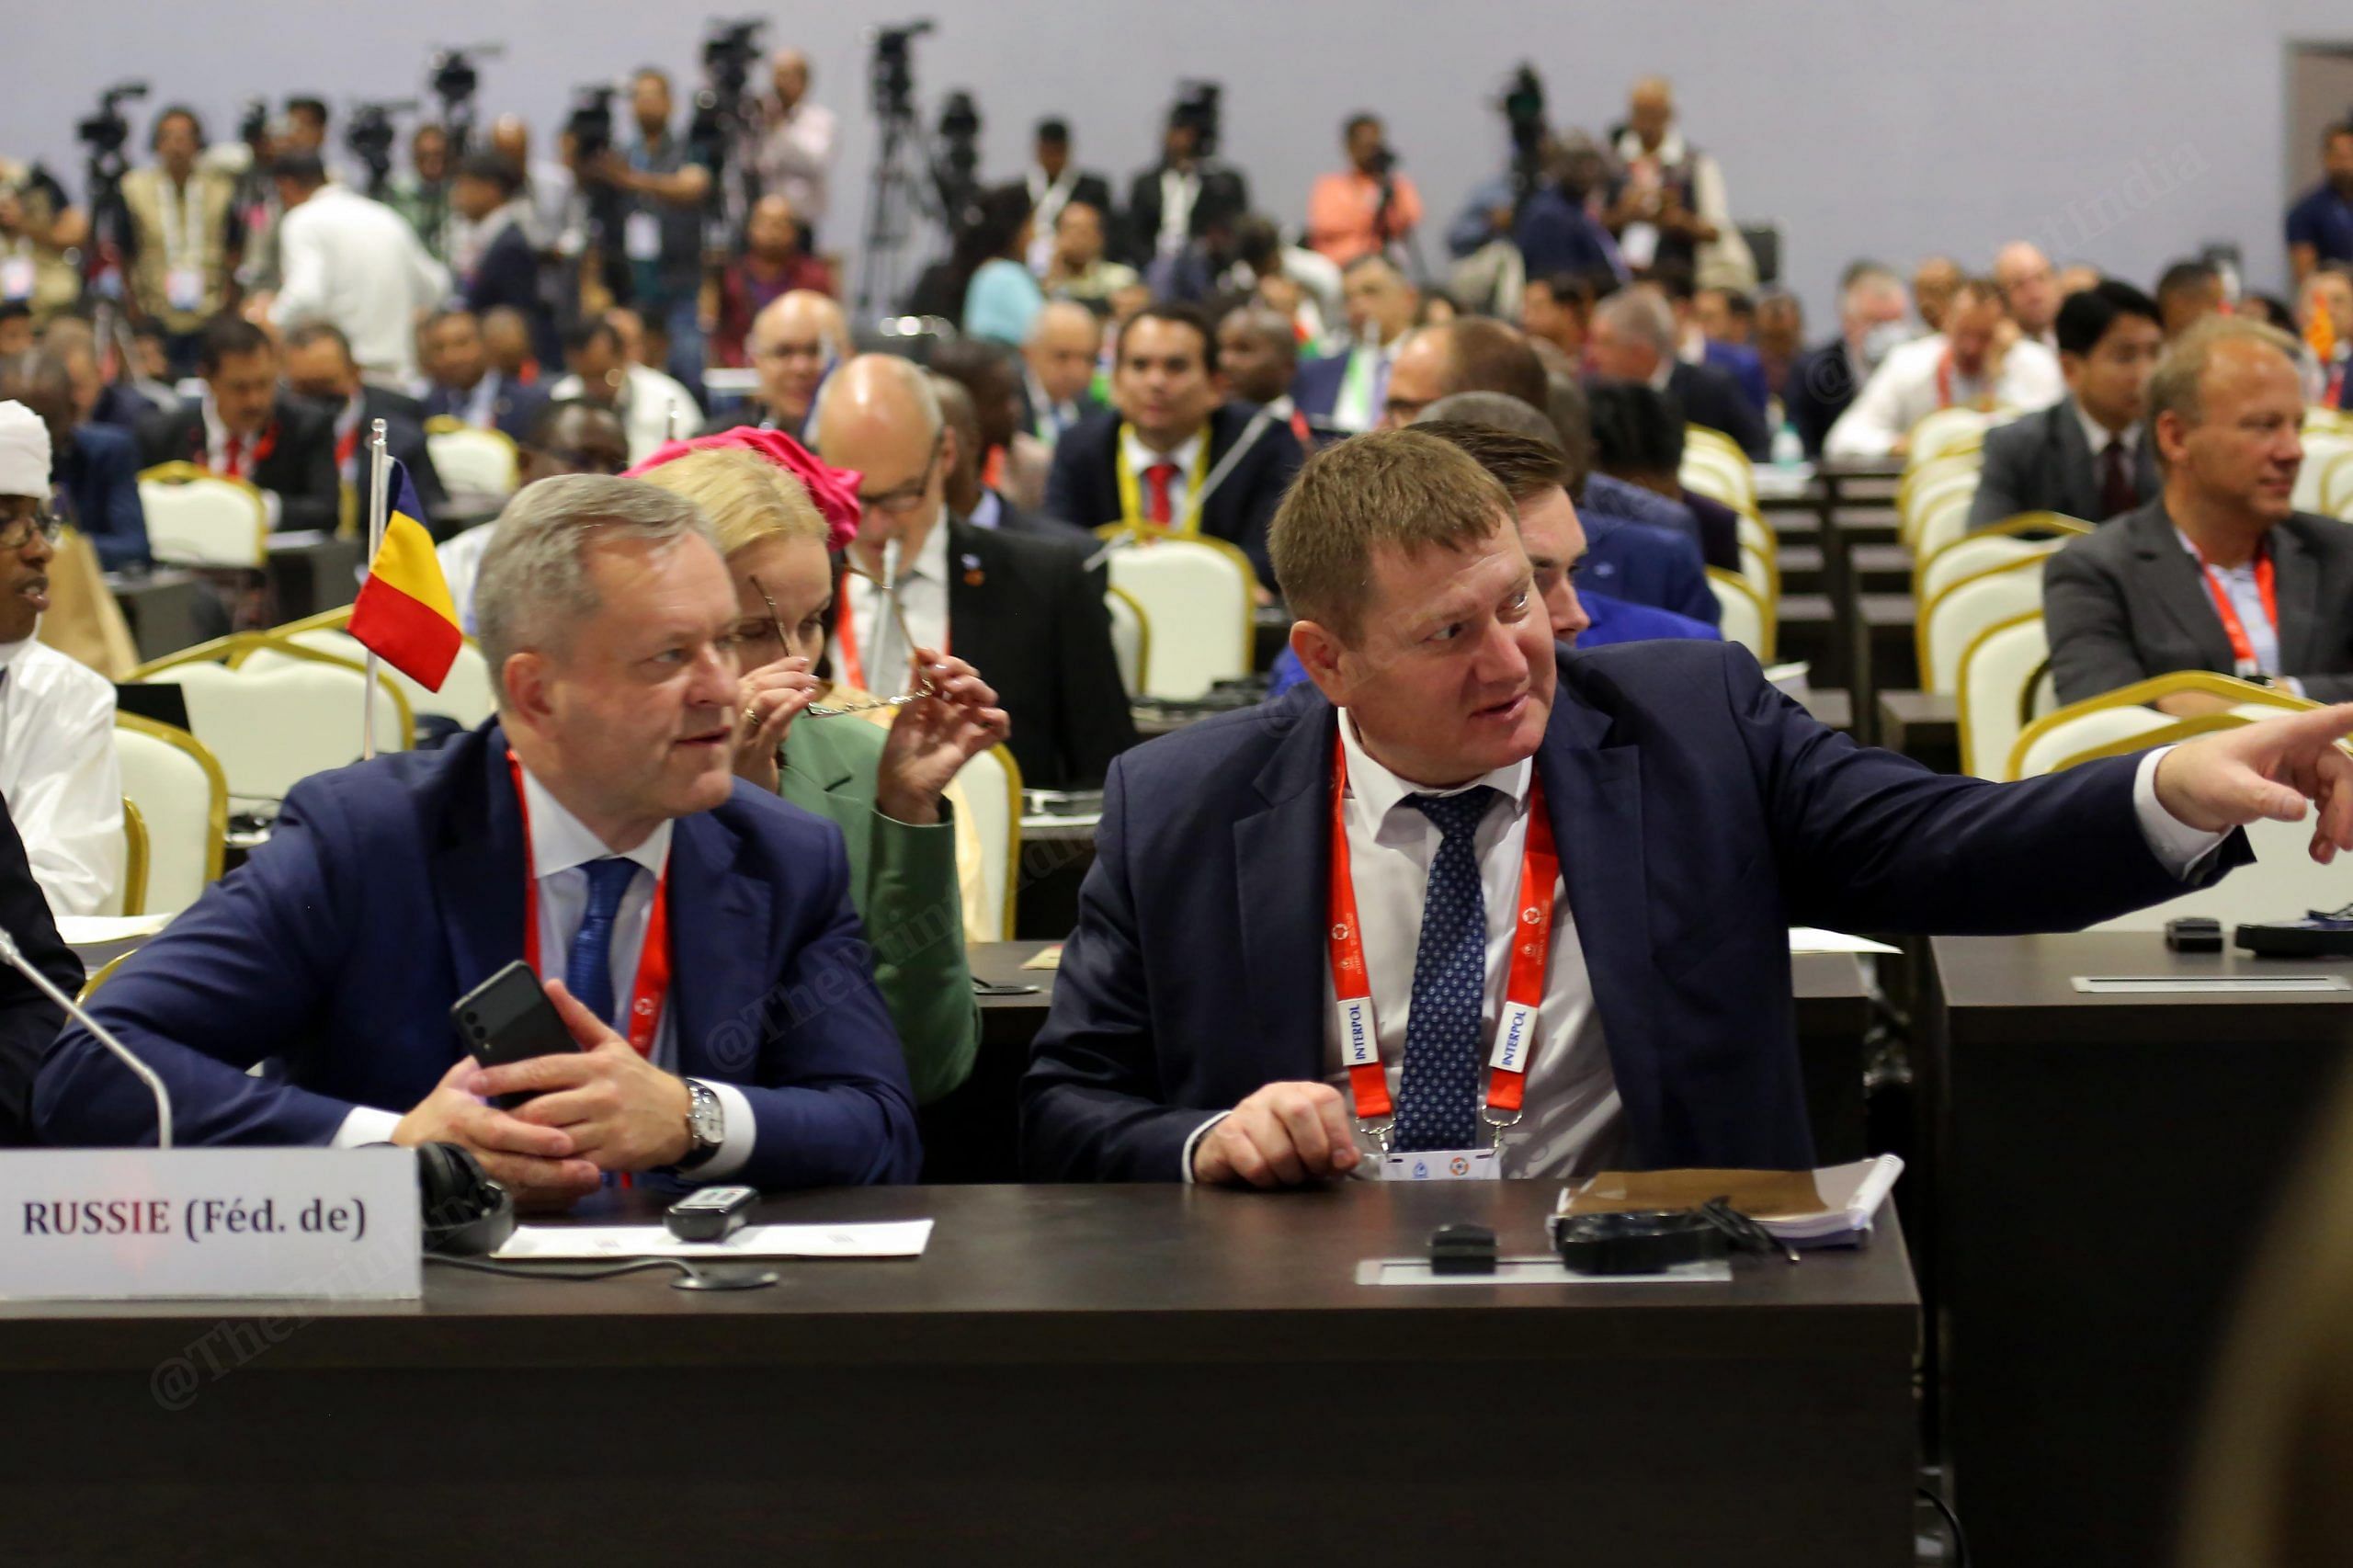 Delegates from Russie during the 90th General Assembly of INTERPOL at Pragati Maidan | Photo: Praveen Jain | ThePrint